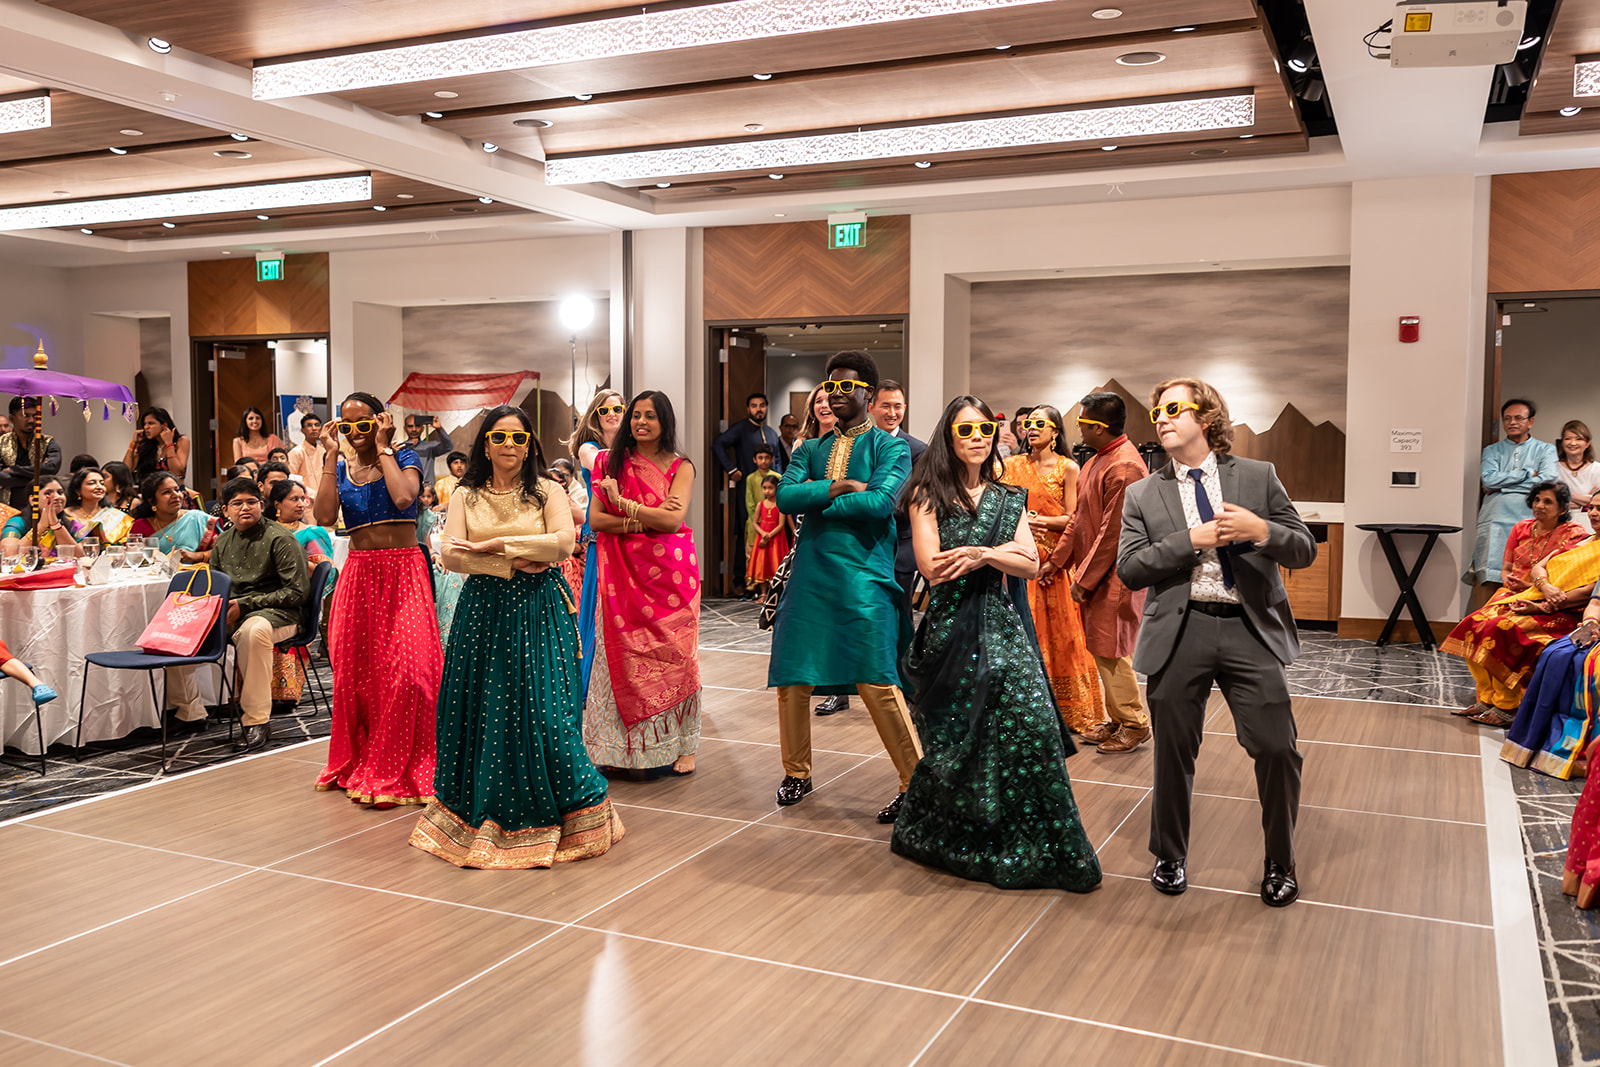 Indian wedding dance at Sangreet ceremony at Hyatt Centric Hotel, a Bay Area Indian Wedding Venue.